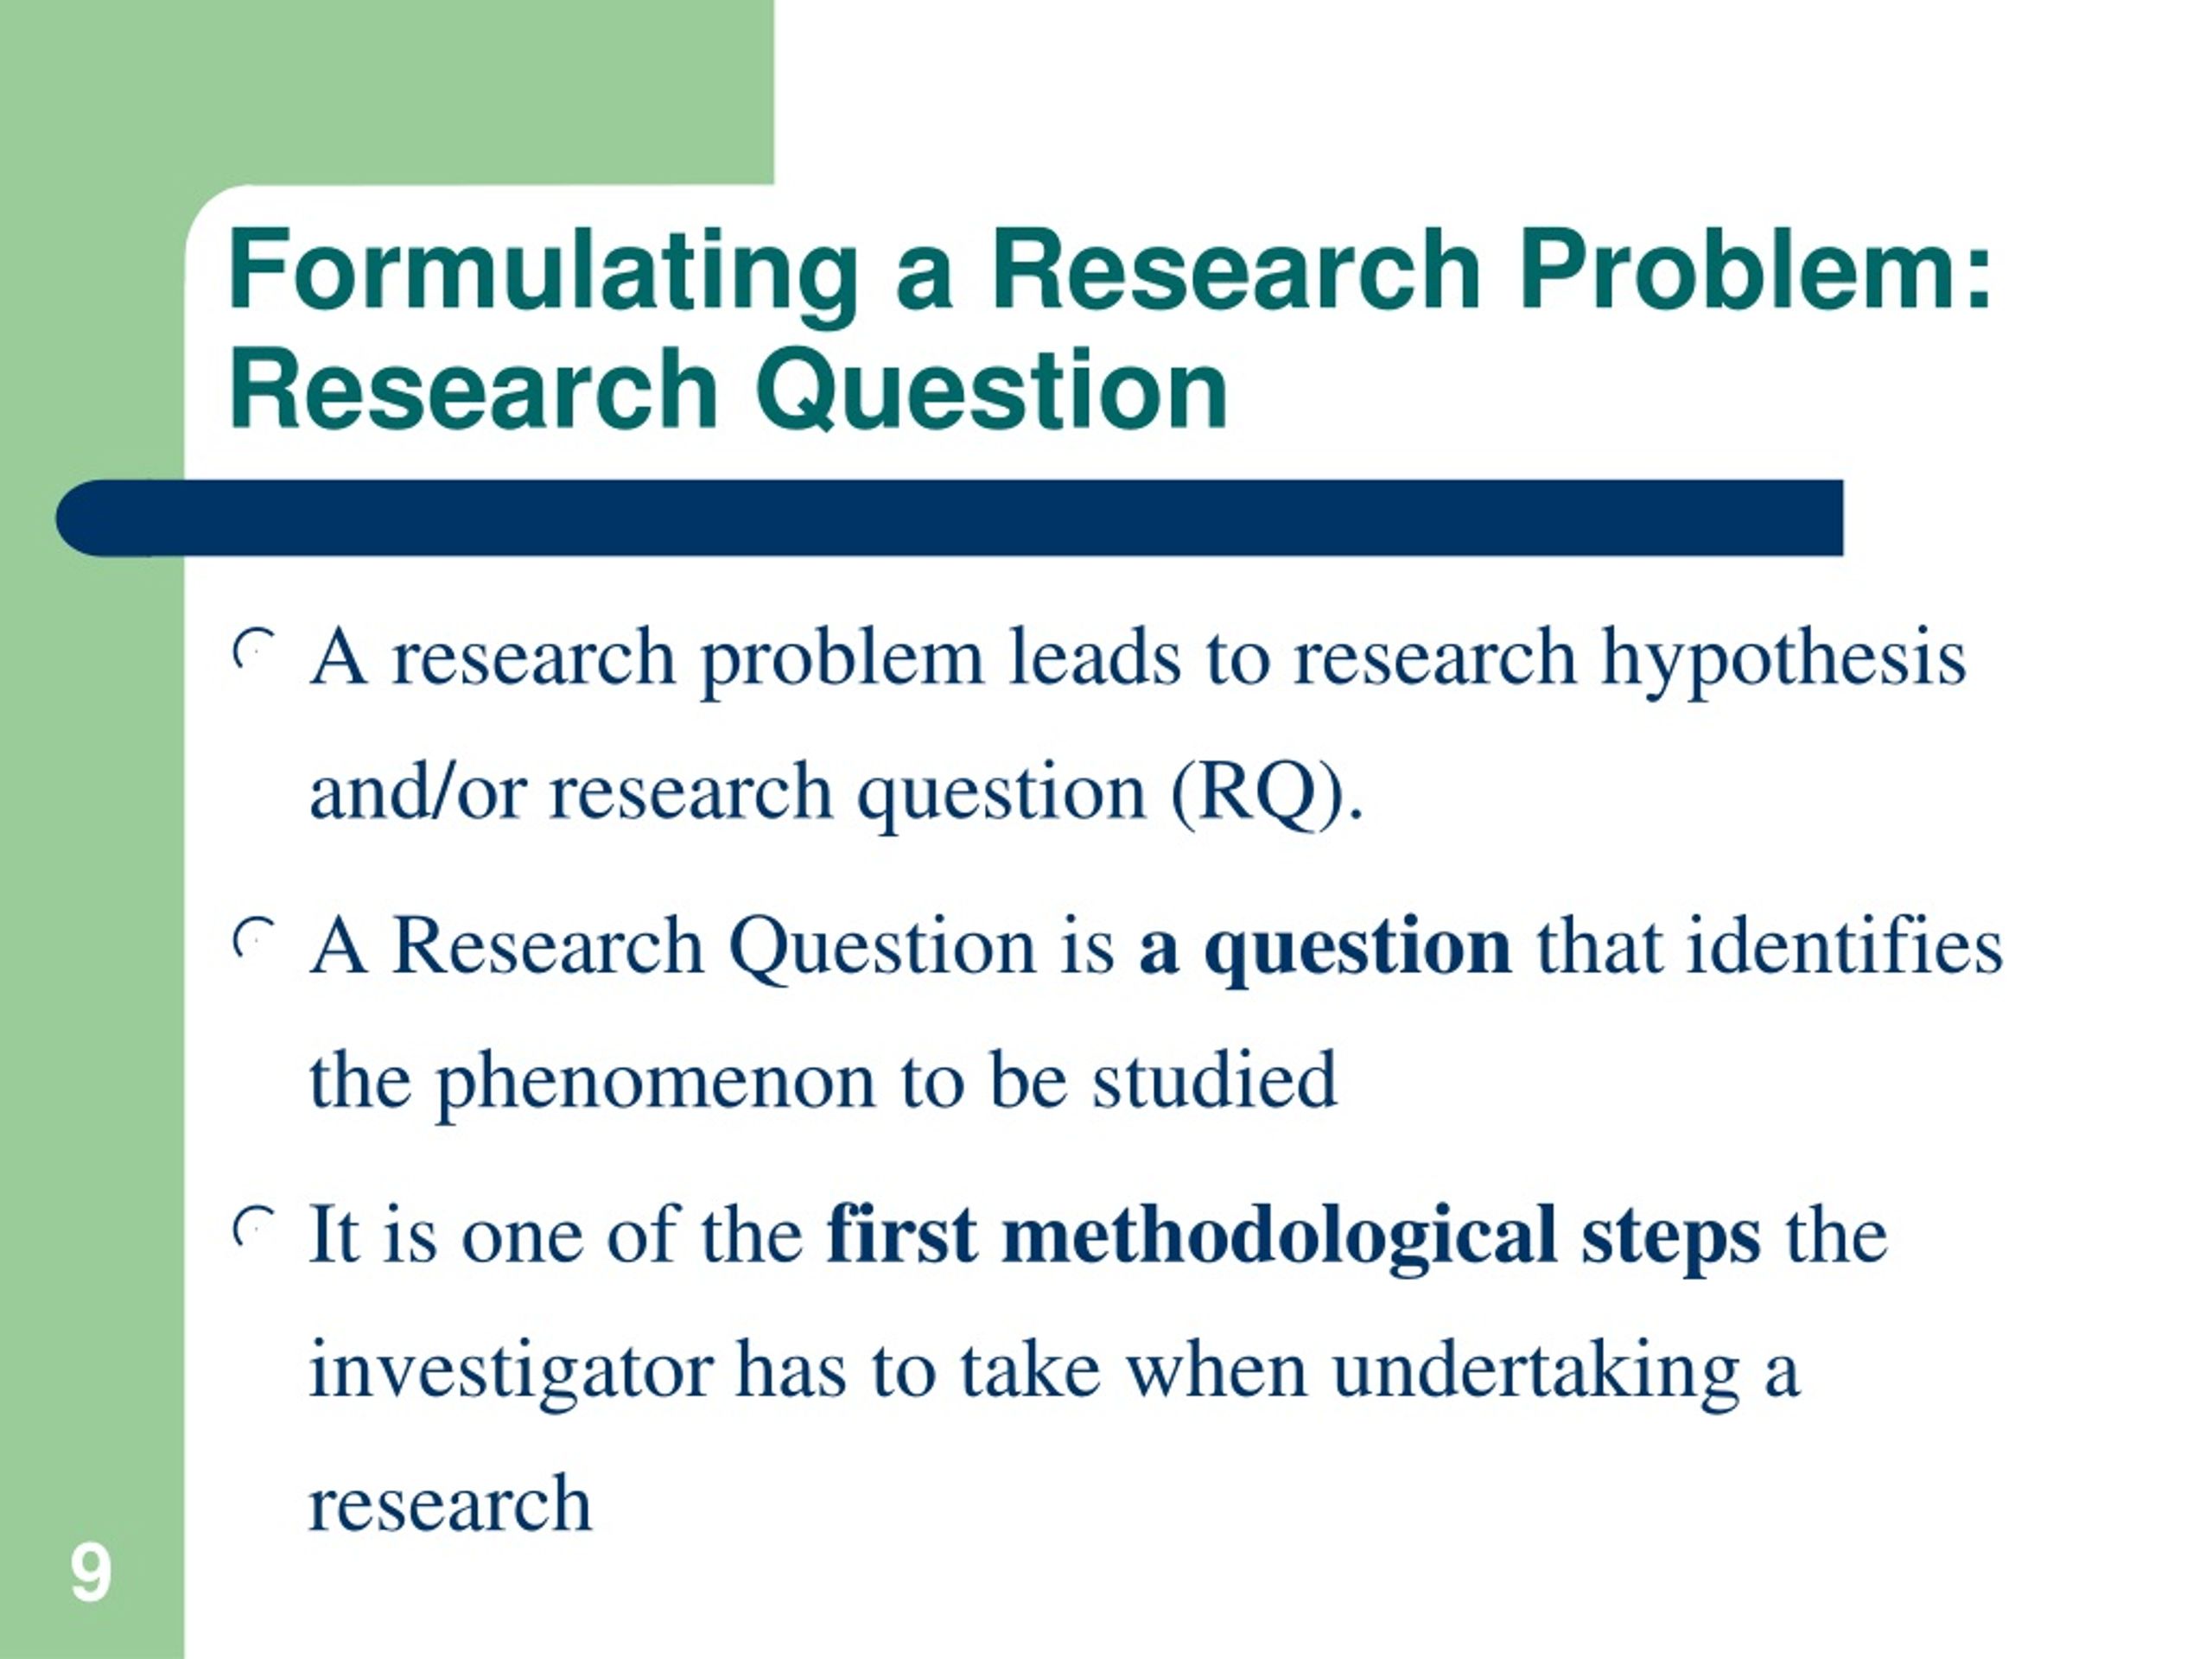 formulating a research question ppt